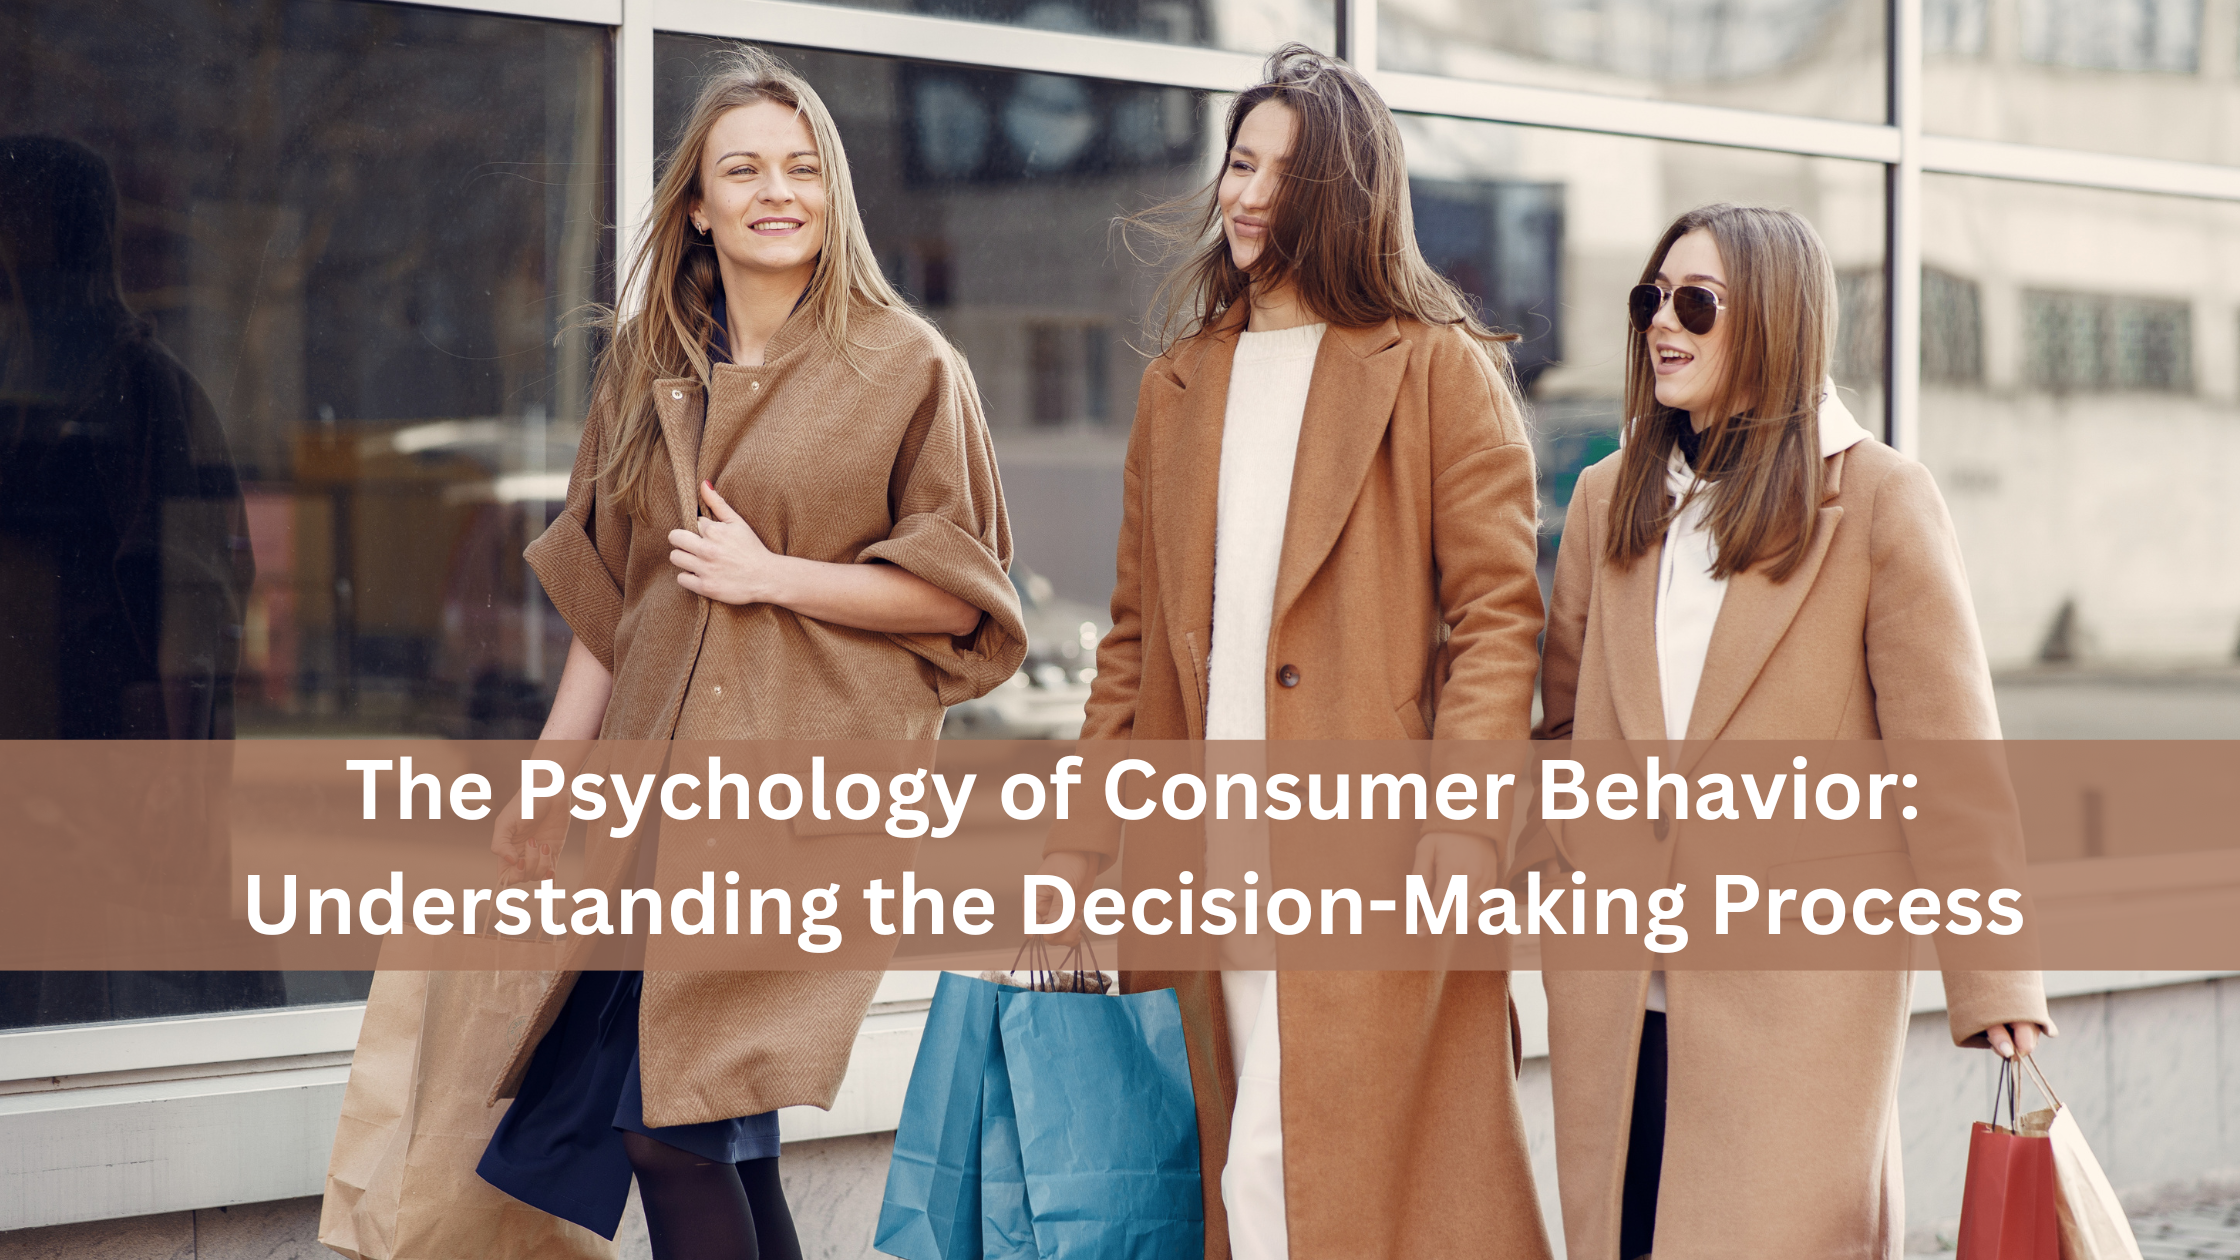 The Psychology of Consumer Behavior: Understanding the Decision-Making Process